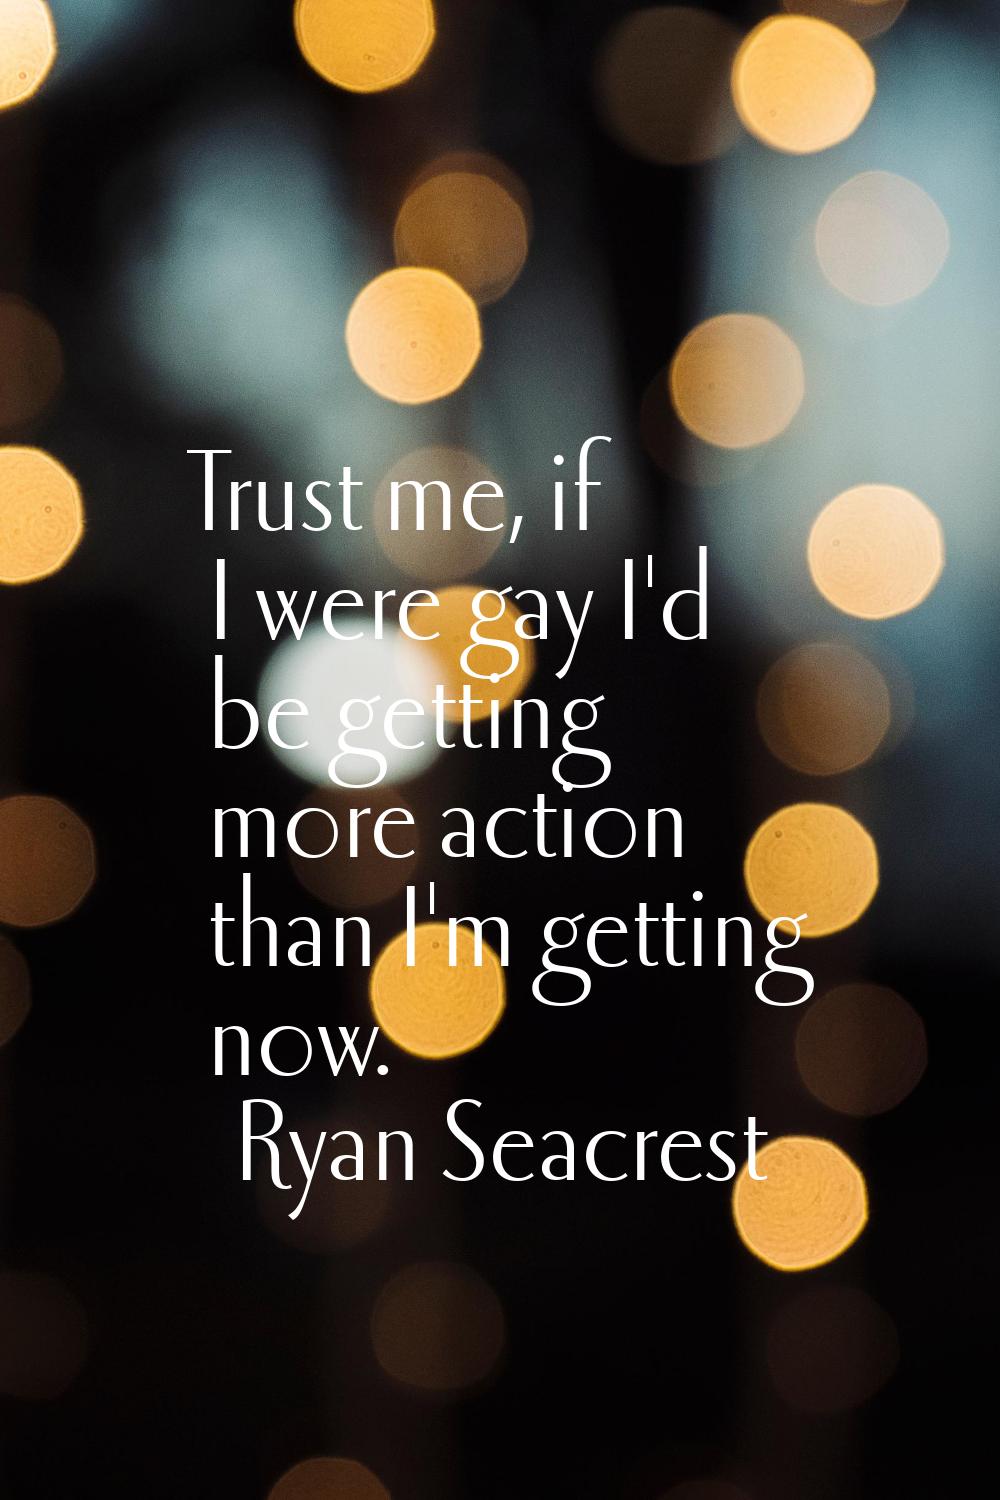 Trust me, if I were gay I'd be getting more action than I'm getting now.